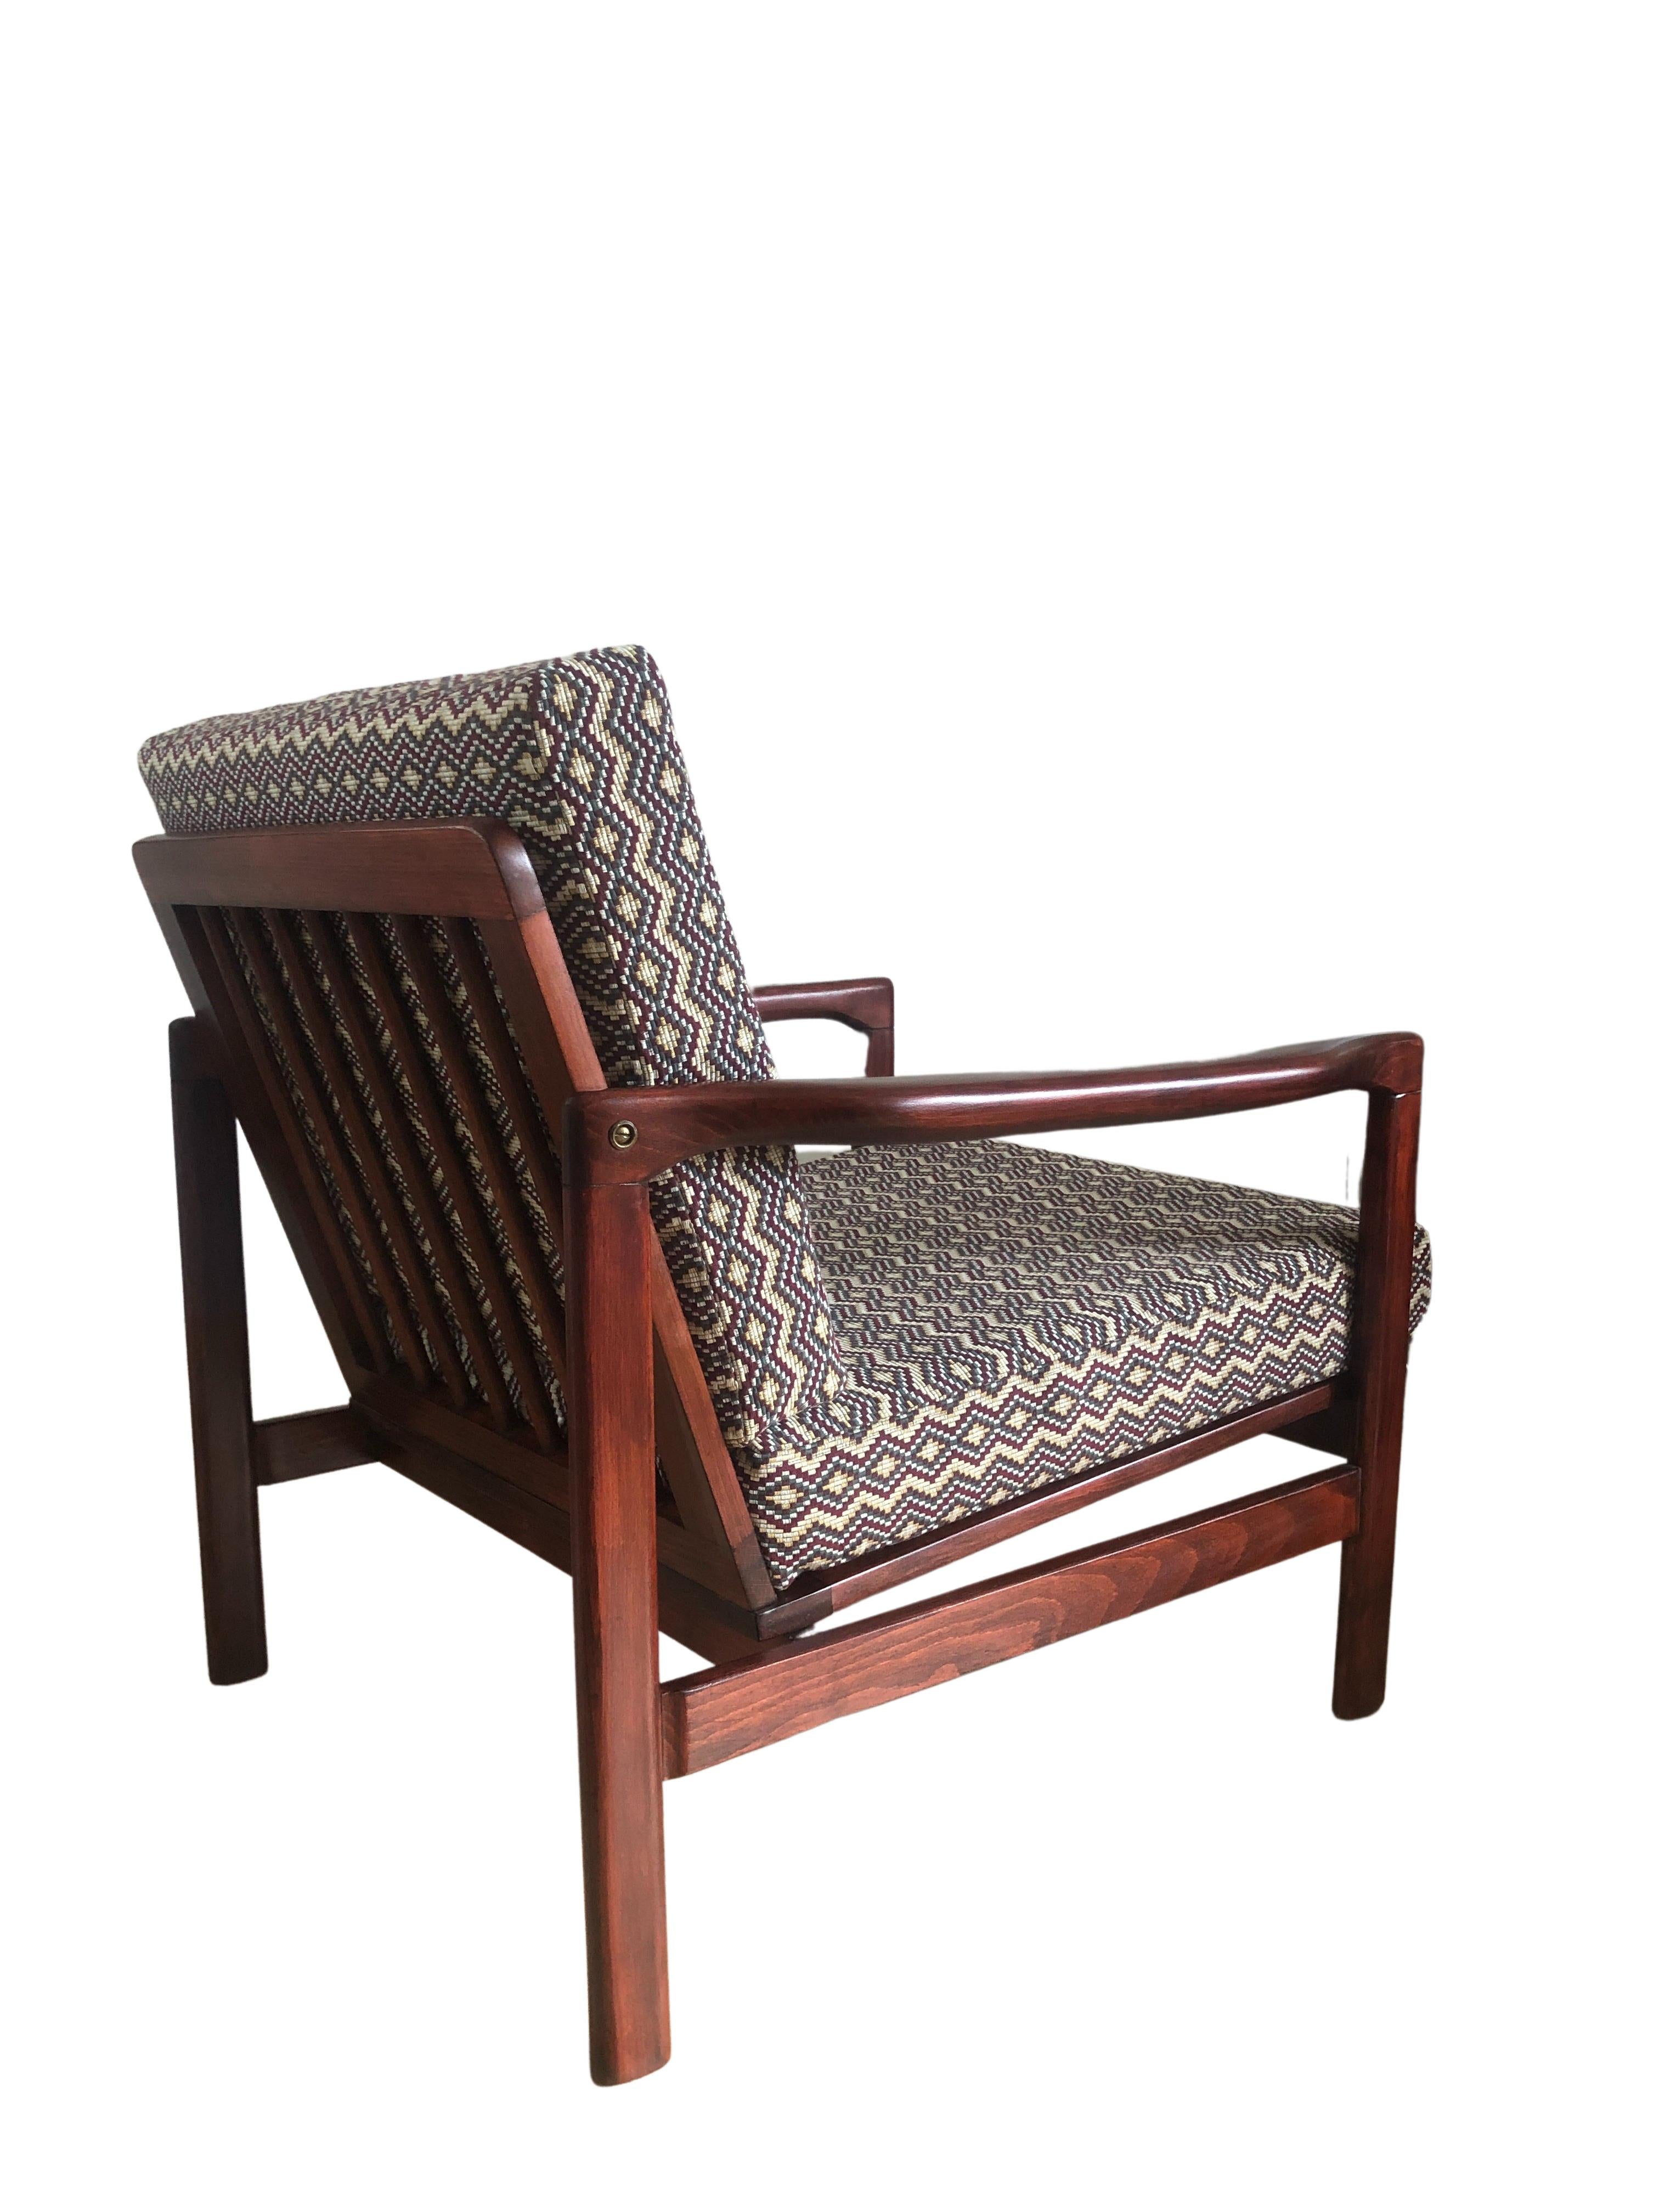 The set of two lounge chairs model B-7752, designed by Zenon Baczyk, has been manufactured by Swarzedzkie Fabryki Mebli in Poland in the 1960s. 

The structure is made of beech wood in deep brown color, finished with a semi matte varnish. 

The